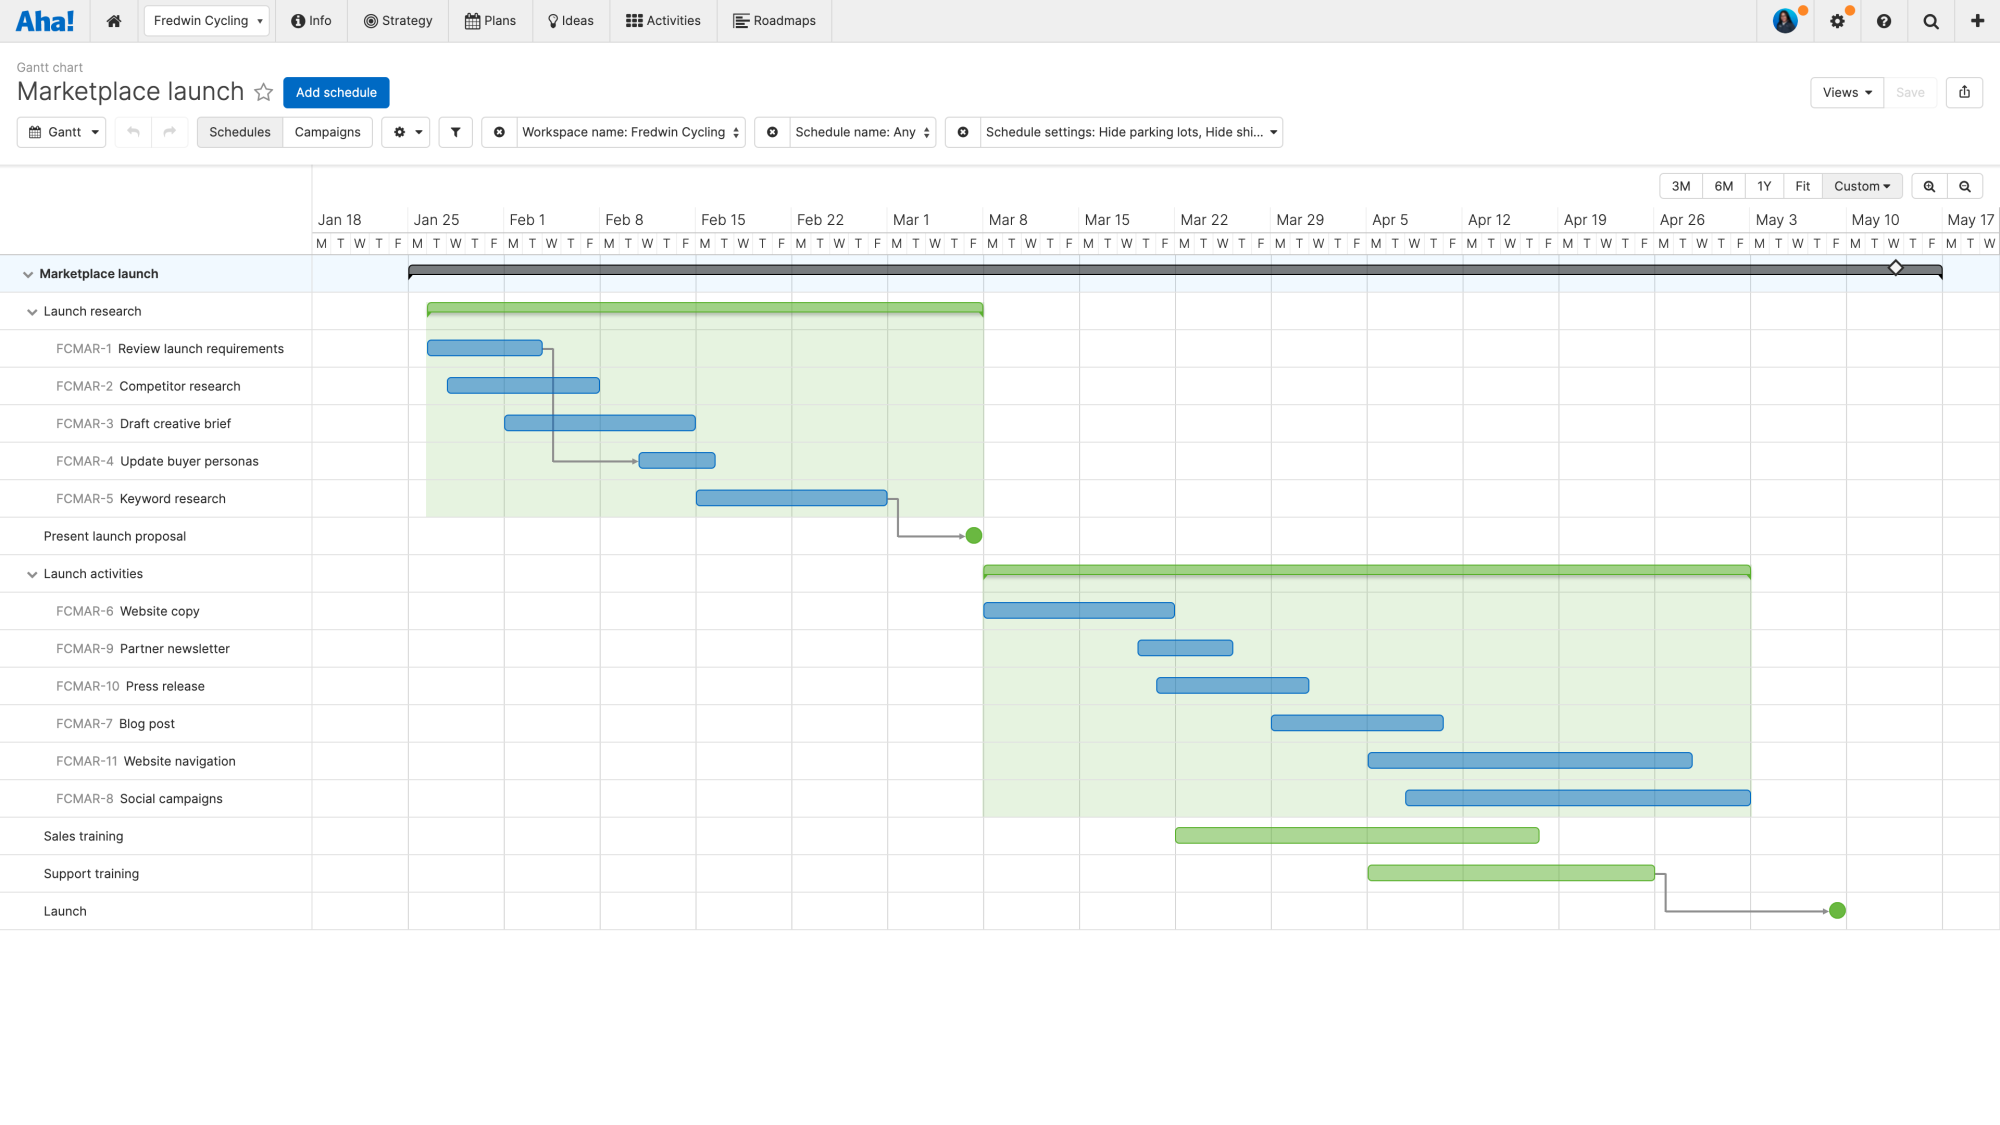 Use the Gantt chart to coordinate complex marketing launches.